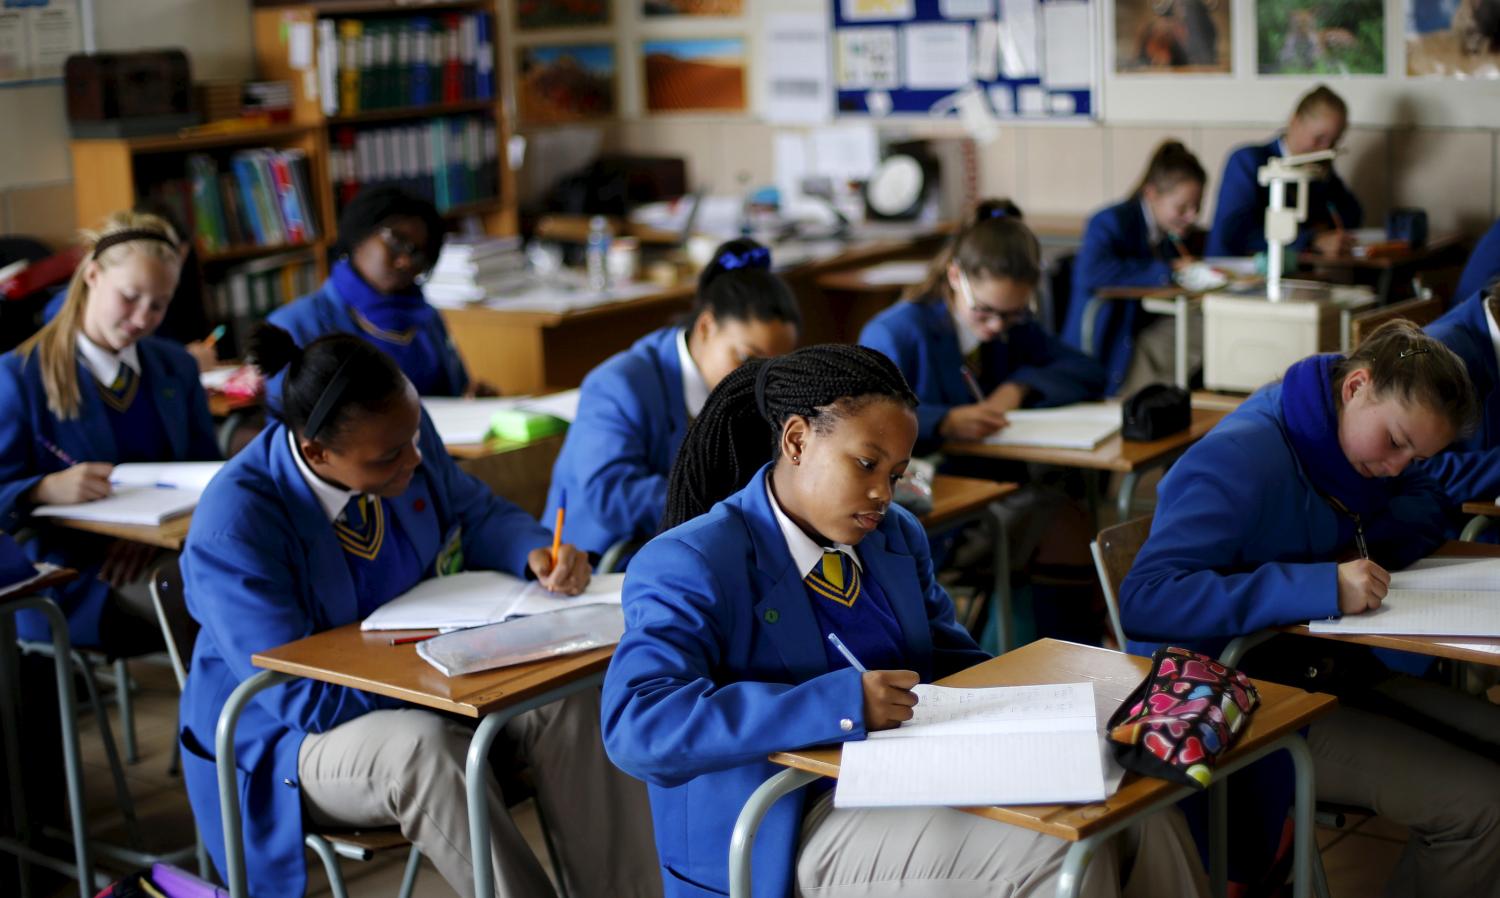 School children attend class at Waterstone College, a private school managed by Curro in the south of Johannesburg July 22, 2015. South African private education group Advtech rejected a takeover offer from its bigger rival Curro Holdings, saying on Tuesday the proposal contained "unacceptable pre-conditions". Advtech's shares fell more than 7 percent shortly after the announcement that it had rejected Curro's bid, but pared losses to close down 2.93 percent at 11.60 rand. The shares are up about 30 percent so far this year. Curro's stock shed 0.83 percent to close on 11.70 rand. REUTERS/Siphiwe Sibeko  - GF10000166738